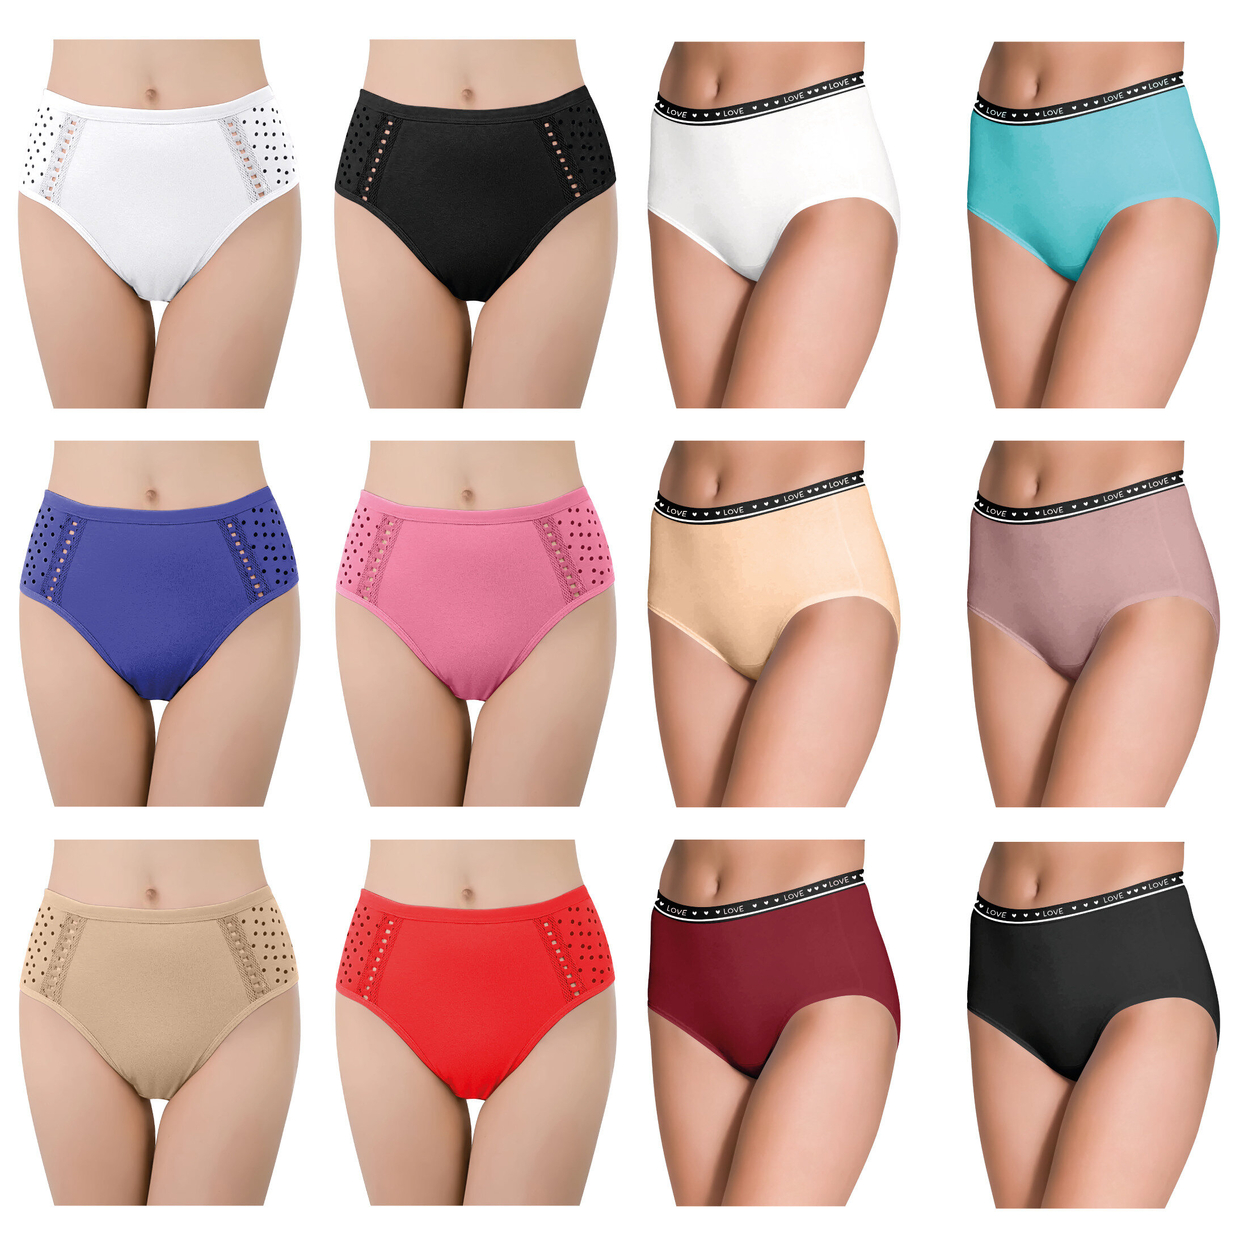 Multi-Pack: Women's Ultra Soft Moisture Wicking Panties Cotton Perfect Fit Underwear (Plus Sizes Available) - 12-Pack, X-large